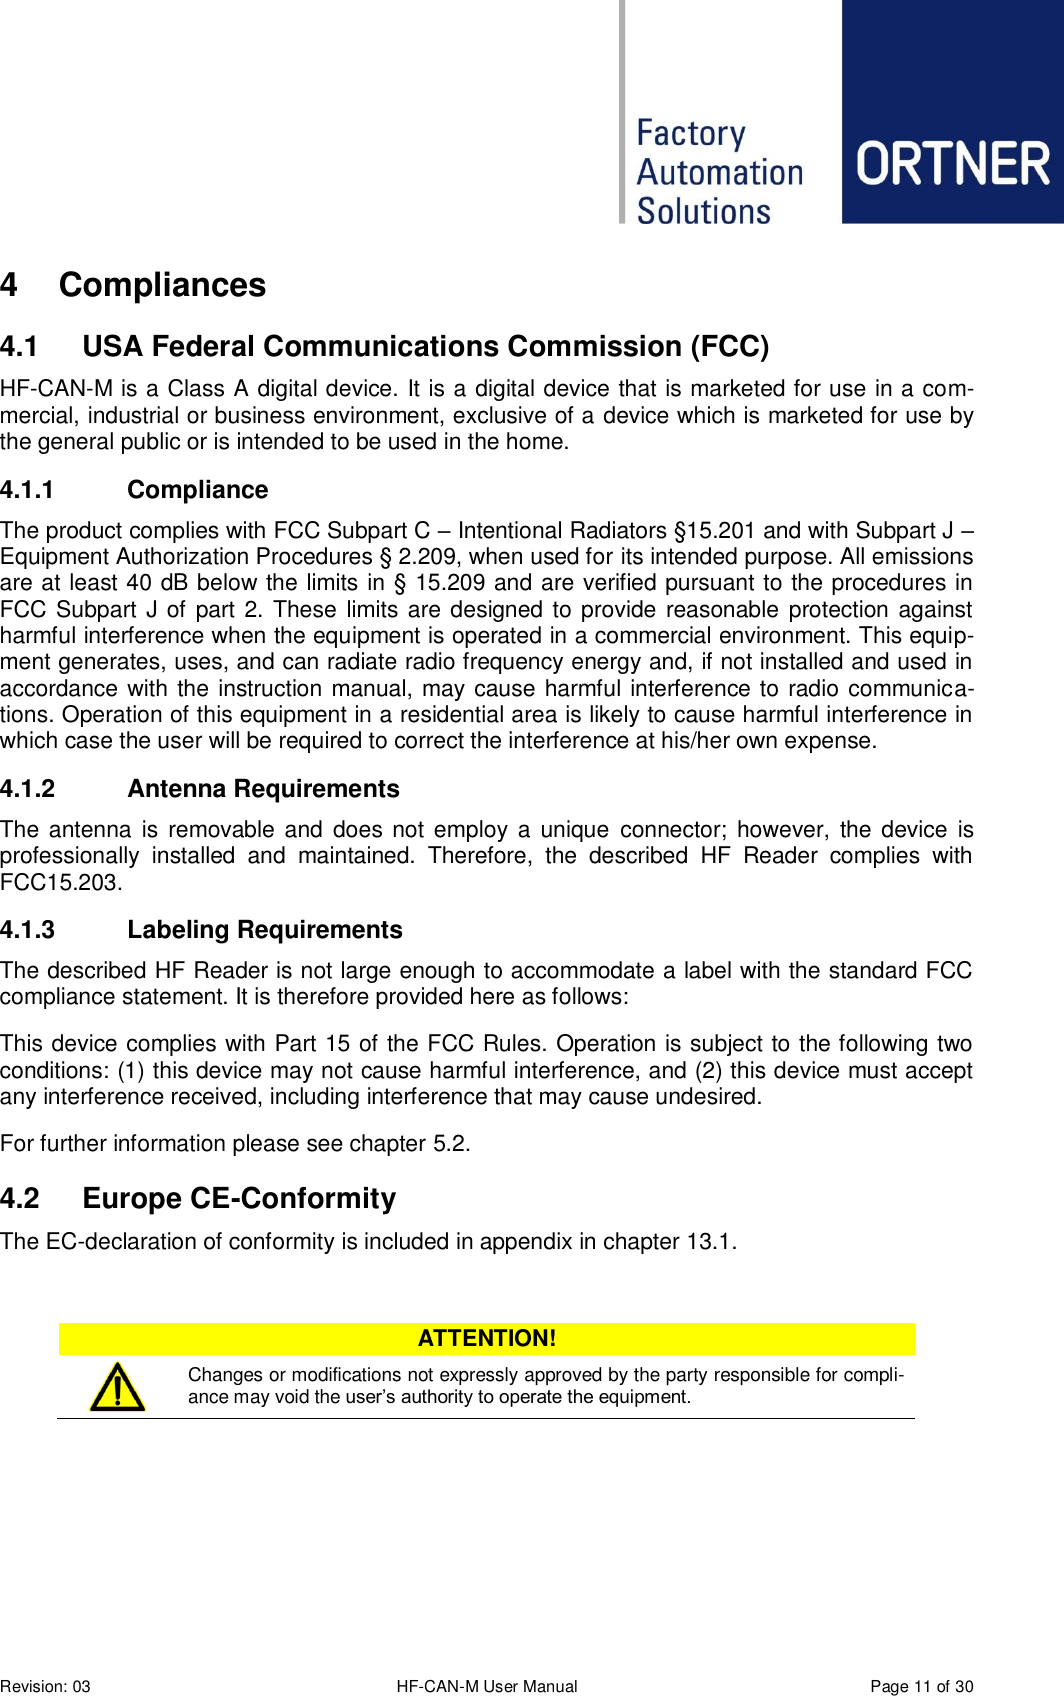  Revision: 03 HF-CAN-M User Manual  Page 11 of 30 4  Compliances 4.1  USA Federal Communications Commission (FCC) HF-CAN-M is a Class A digital device. It is a digital device that is marketed for use in a com-mercial, industrial or business environment, exclusive of a device which is marketed for use by the general public or is intended to be used in the home. 4.1.1  Compliance The product complies with FCC Subpart C – Intentional Radiators §15.201 and with Subpart J – Equipment Authorization Procedures § 2.209, when used for its intended purpose. All emissions are at least 40 dB below the limits in § 15.209 and are verified pursuant to the procedures in FCC Subpart J of part 2. These limits are designed to provide reasonable protection against harmful interference when the equipment is operated in a commercial environment. This equip-ment generates, uses, and can radiate radio frequency energy and, if not installed and used in accordance with the instruction manual, may cause harmful interference to radio communica-tions. Operation of this equipment in a residential area is likely to cause harmful interference in which case the user will be required to correct the interference at his/her own expense. 4.1.2  Antenna Requirements The antenna is removable and does not employ a  unique  connector; however,  the device is professionally  installed  and  maintained.  Therefore,  the  described  HF  Reader  complies  with FCC15.203. 4.1.3  Labeling Requirements The described HF Reader is not large enough to accommodate a label with the standard FCC compliance statement. It is therefore provided here as follows: This device complies with Part 15 of the FCC Rules. Operation is subject to the following two conditions: (1) this device may not cause harmful interference, and (2) this device must accept any interference received, including interference that may cause undesired. For further information please see chapter 5.2. 4.2  Europe CE-Conformity The EC-declaration of conformity is included in appendix in chapter 13.1.  ATTENTION!  Changes or modifications not expressly approved by the party responsible for compli-ance may void the user’s authority to operate the equipment.     